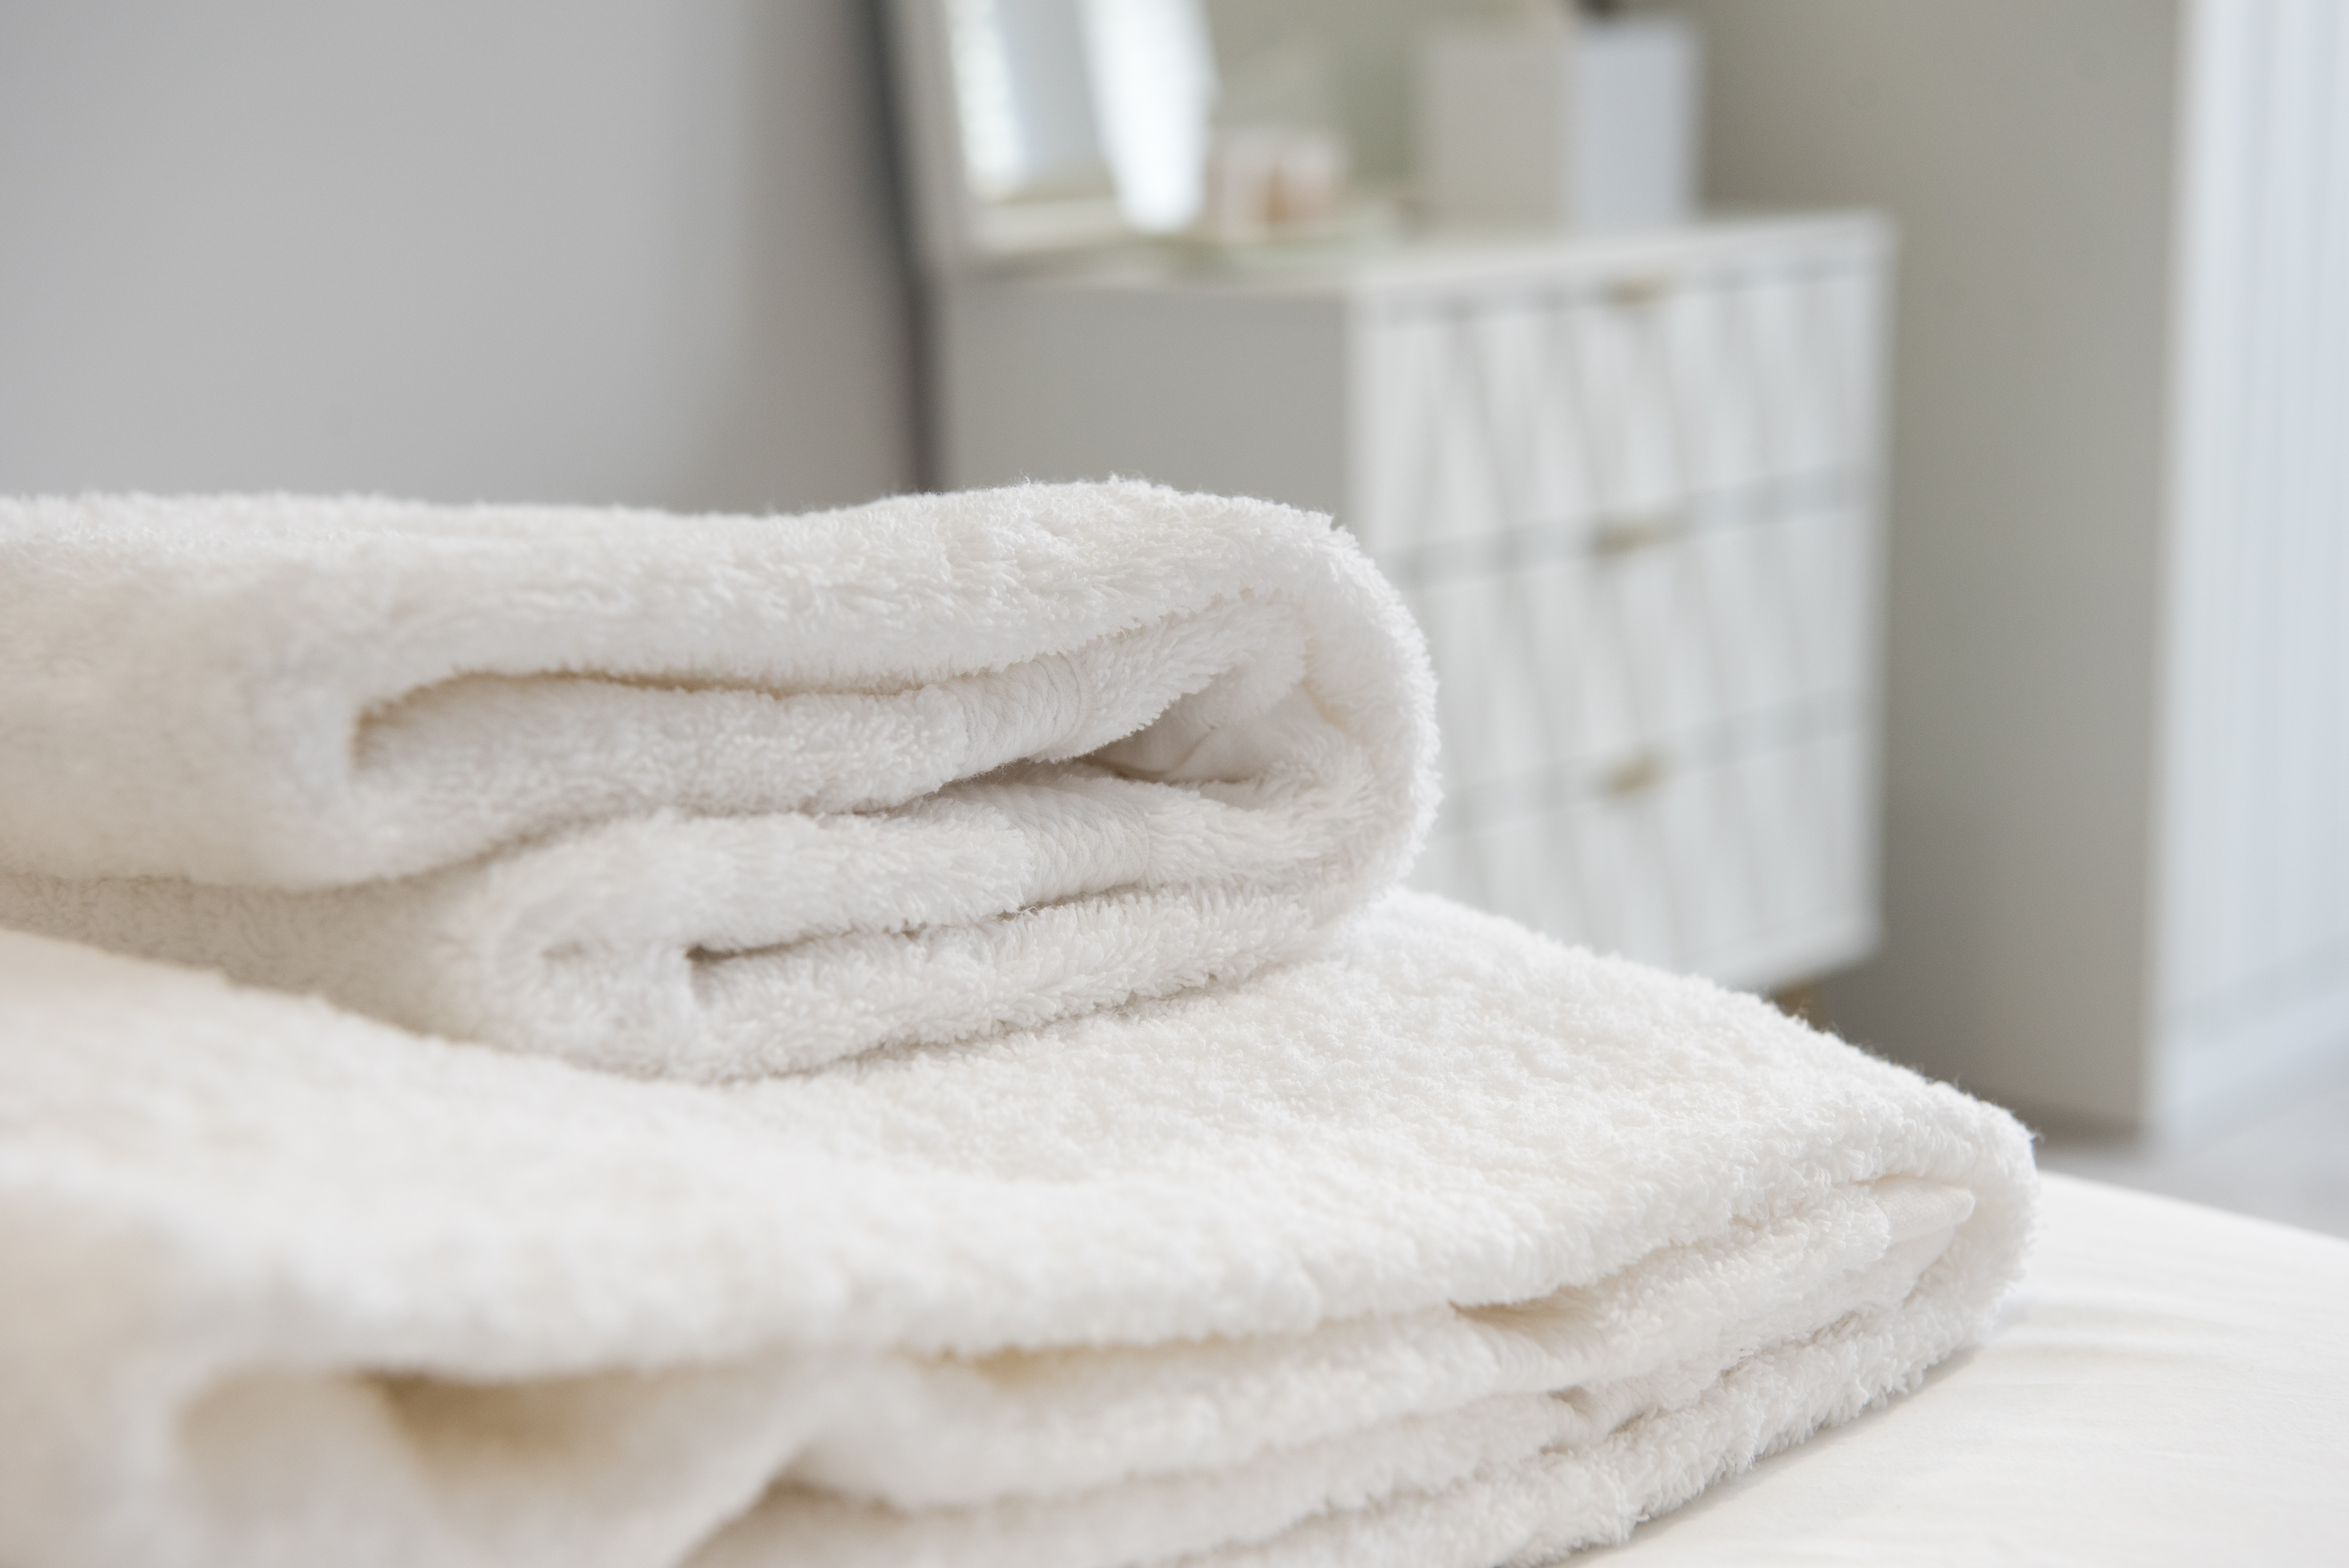 How to Display Towels Decoratively, Hunker